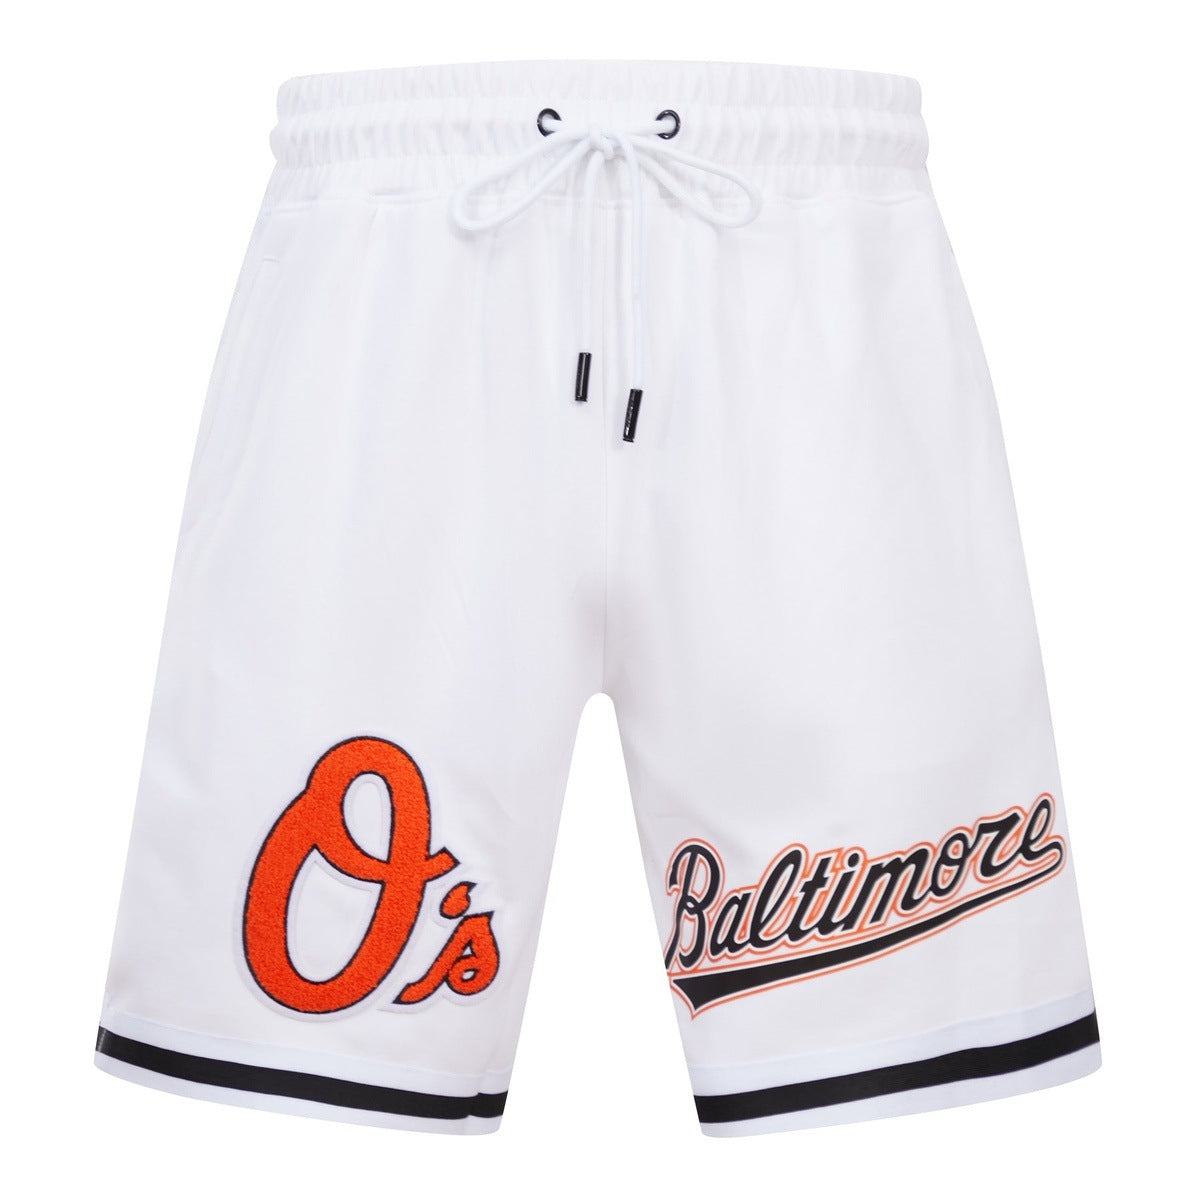 Men's Baltimore Orioles Pro Standard Black Cooperstown Collection Retro  Classic T Shirt - Limotees